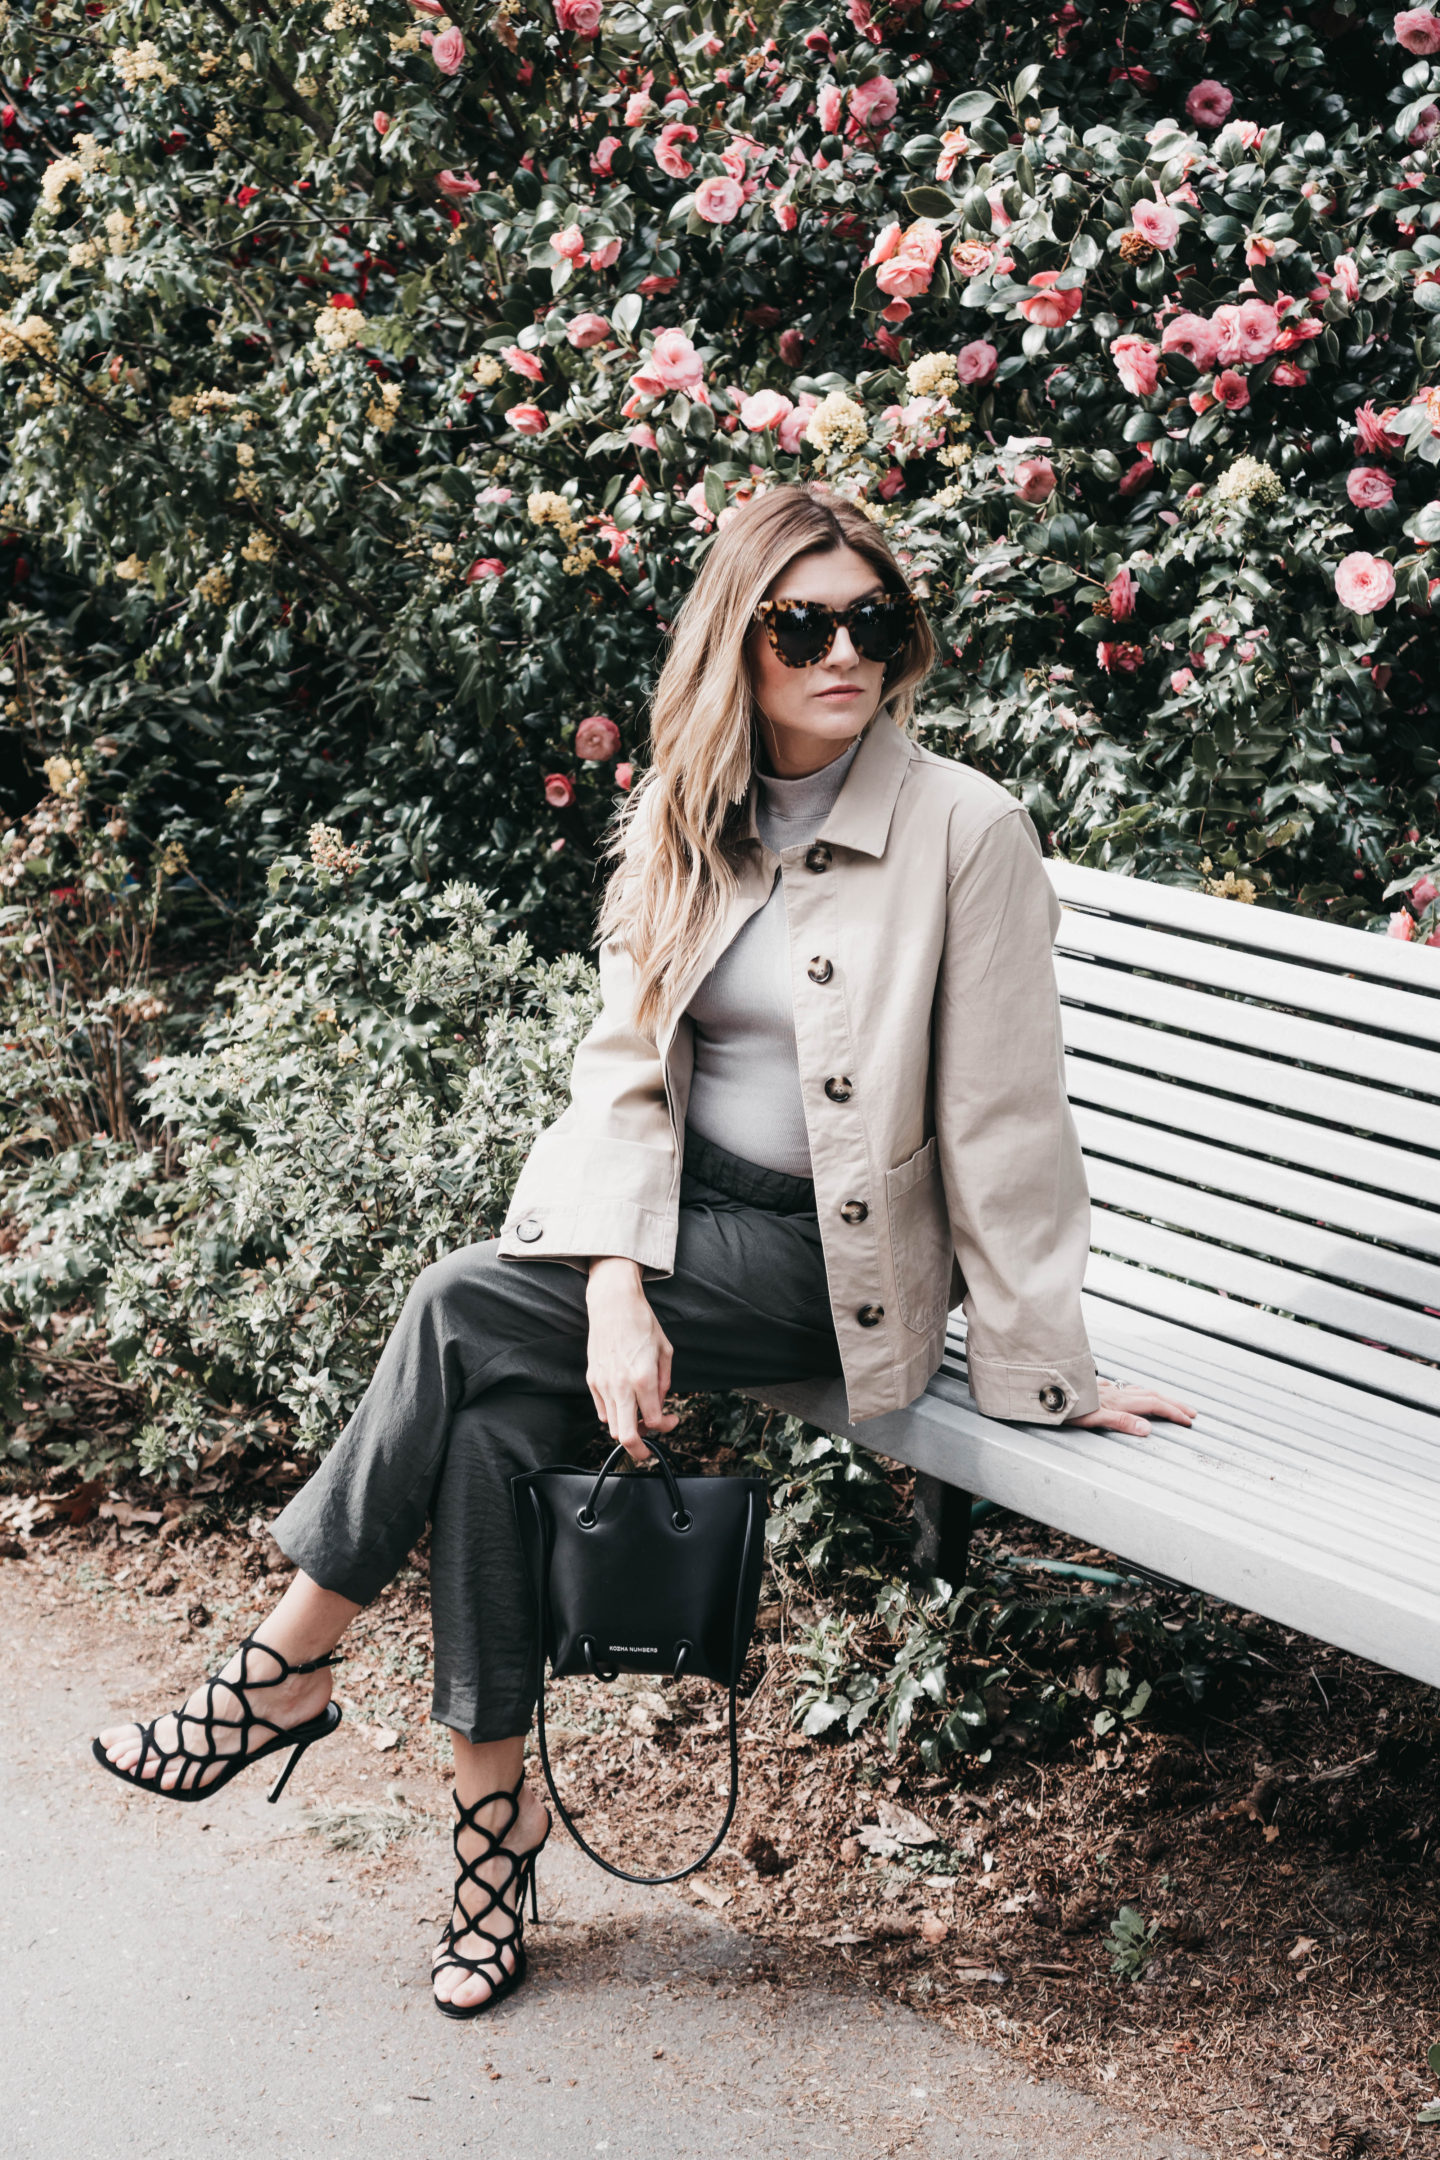 Cortney Bigelow of The Grey Edit - Spring Trend to Watch Utility Wear - featuring H&M - spring rose blooms